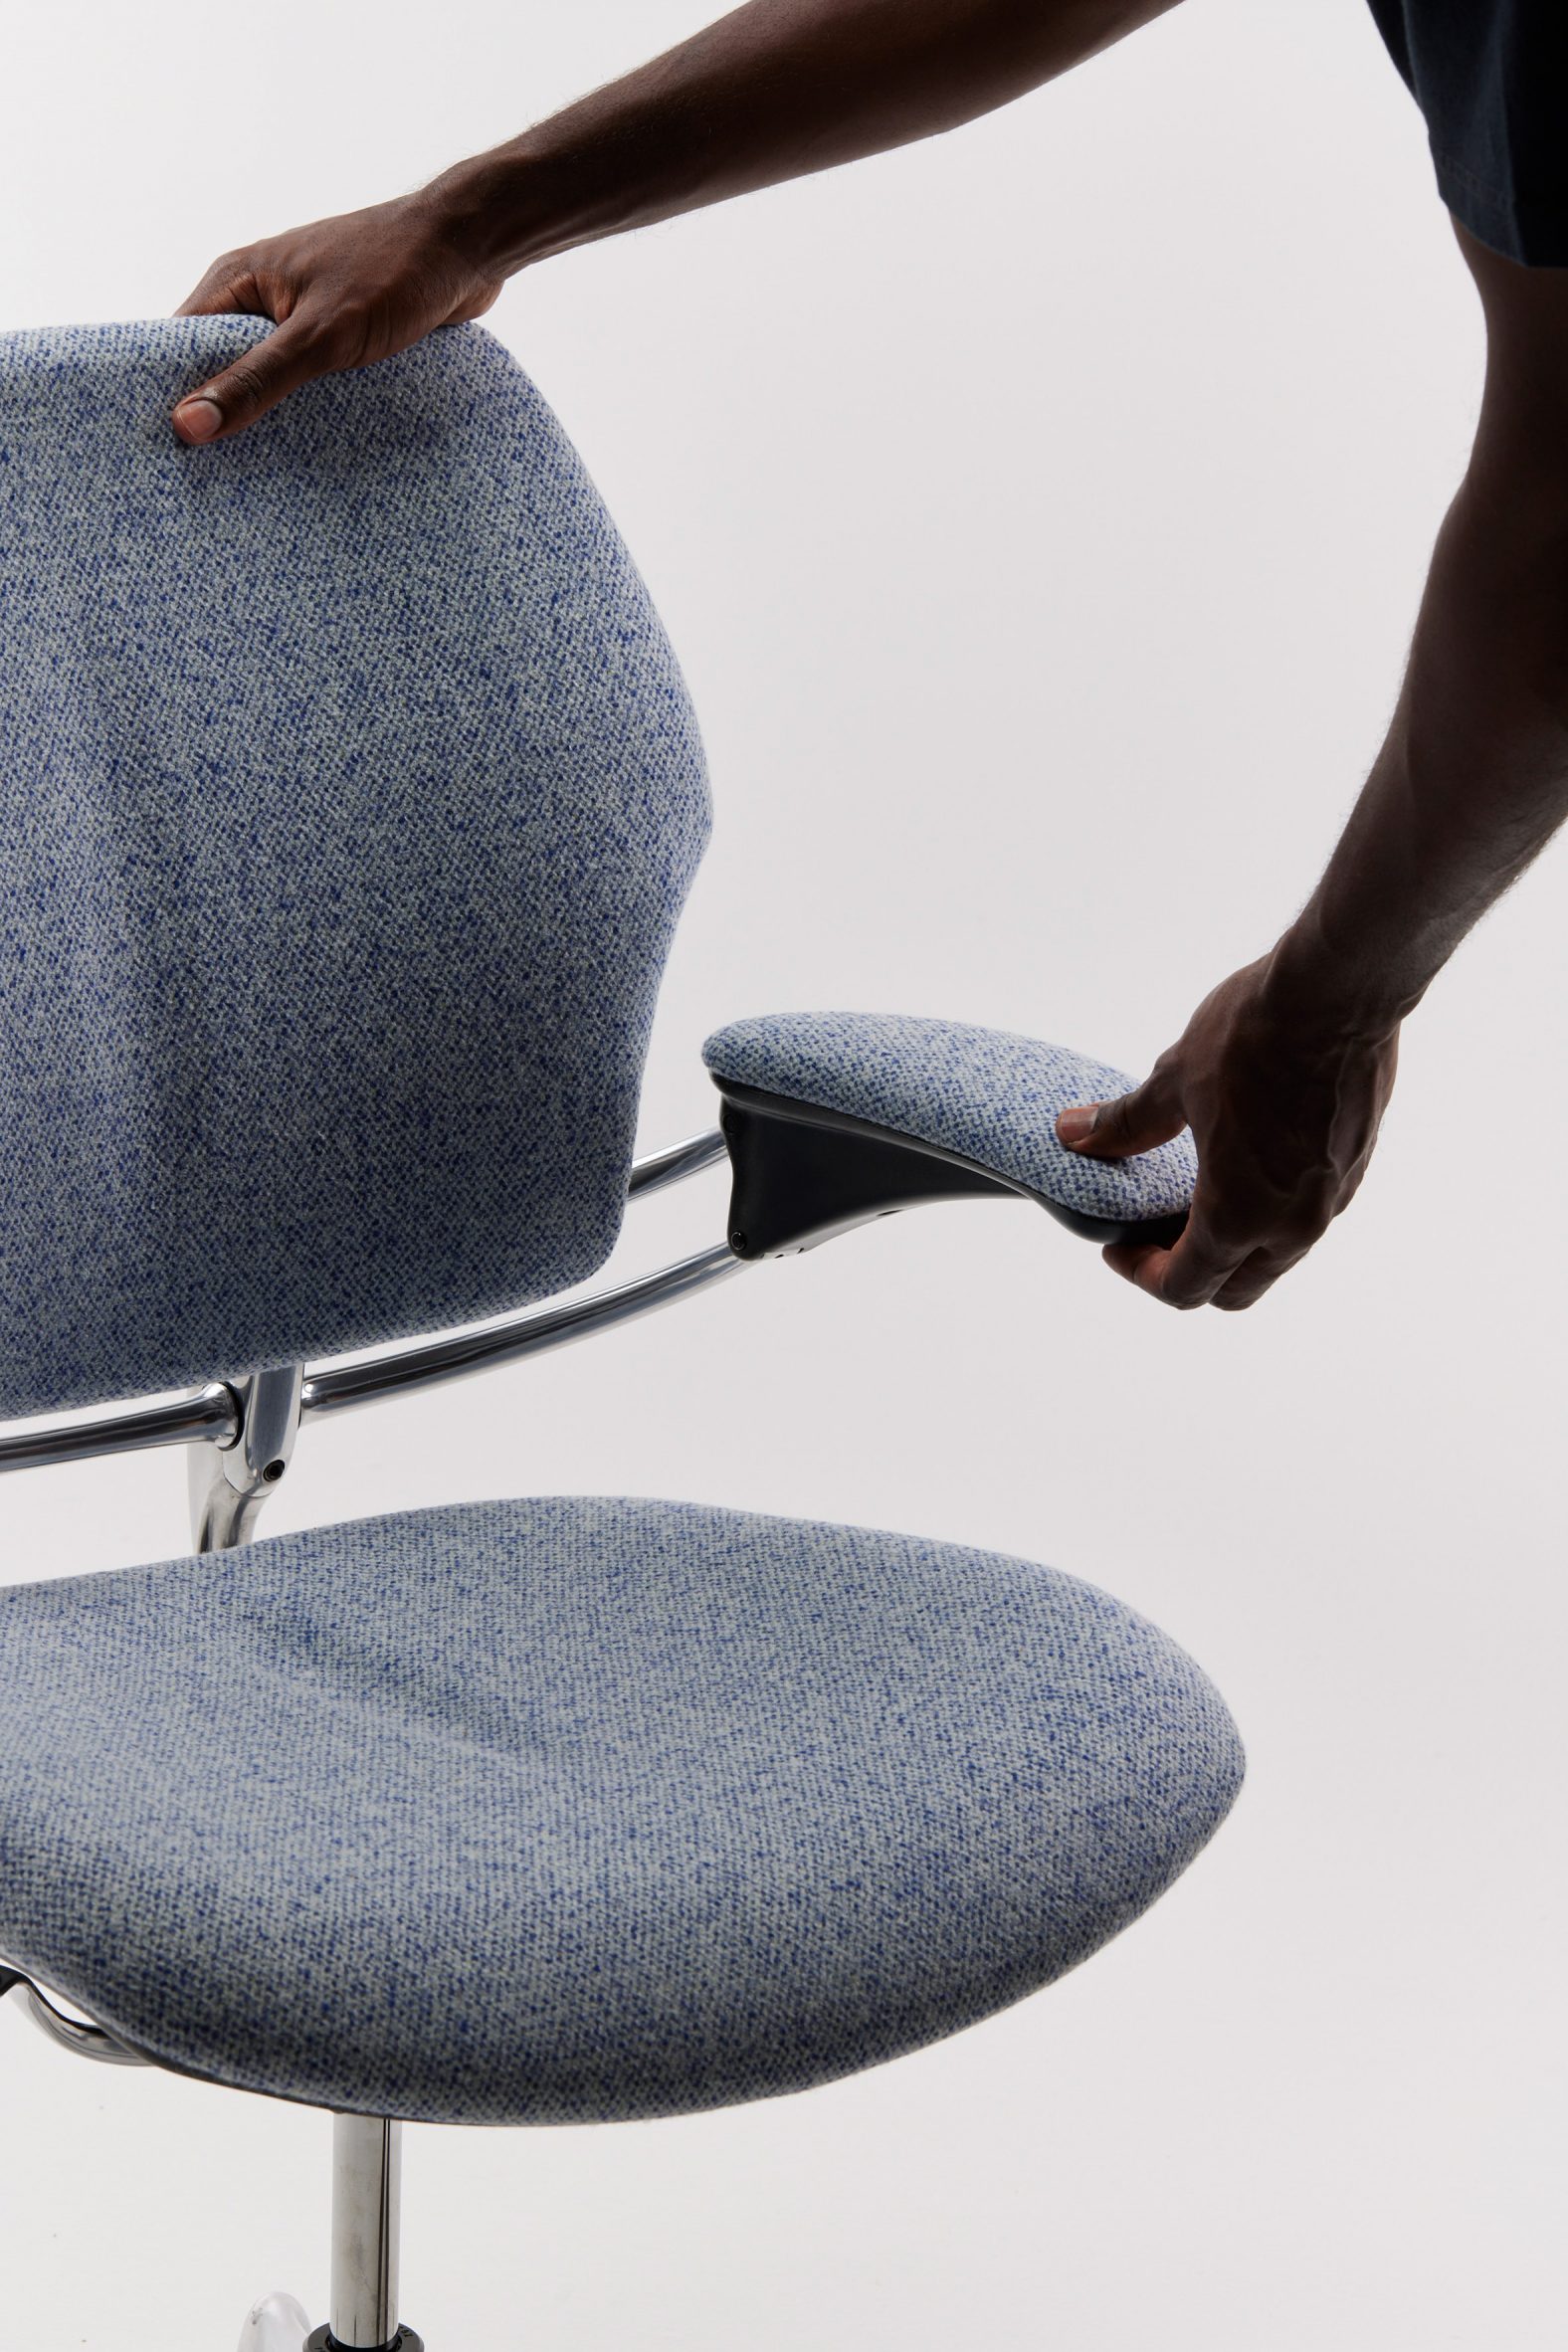 Blue-grey Humanscale task chair